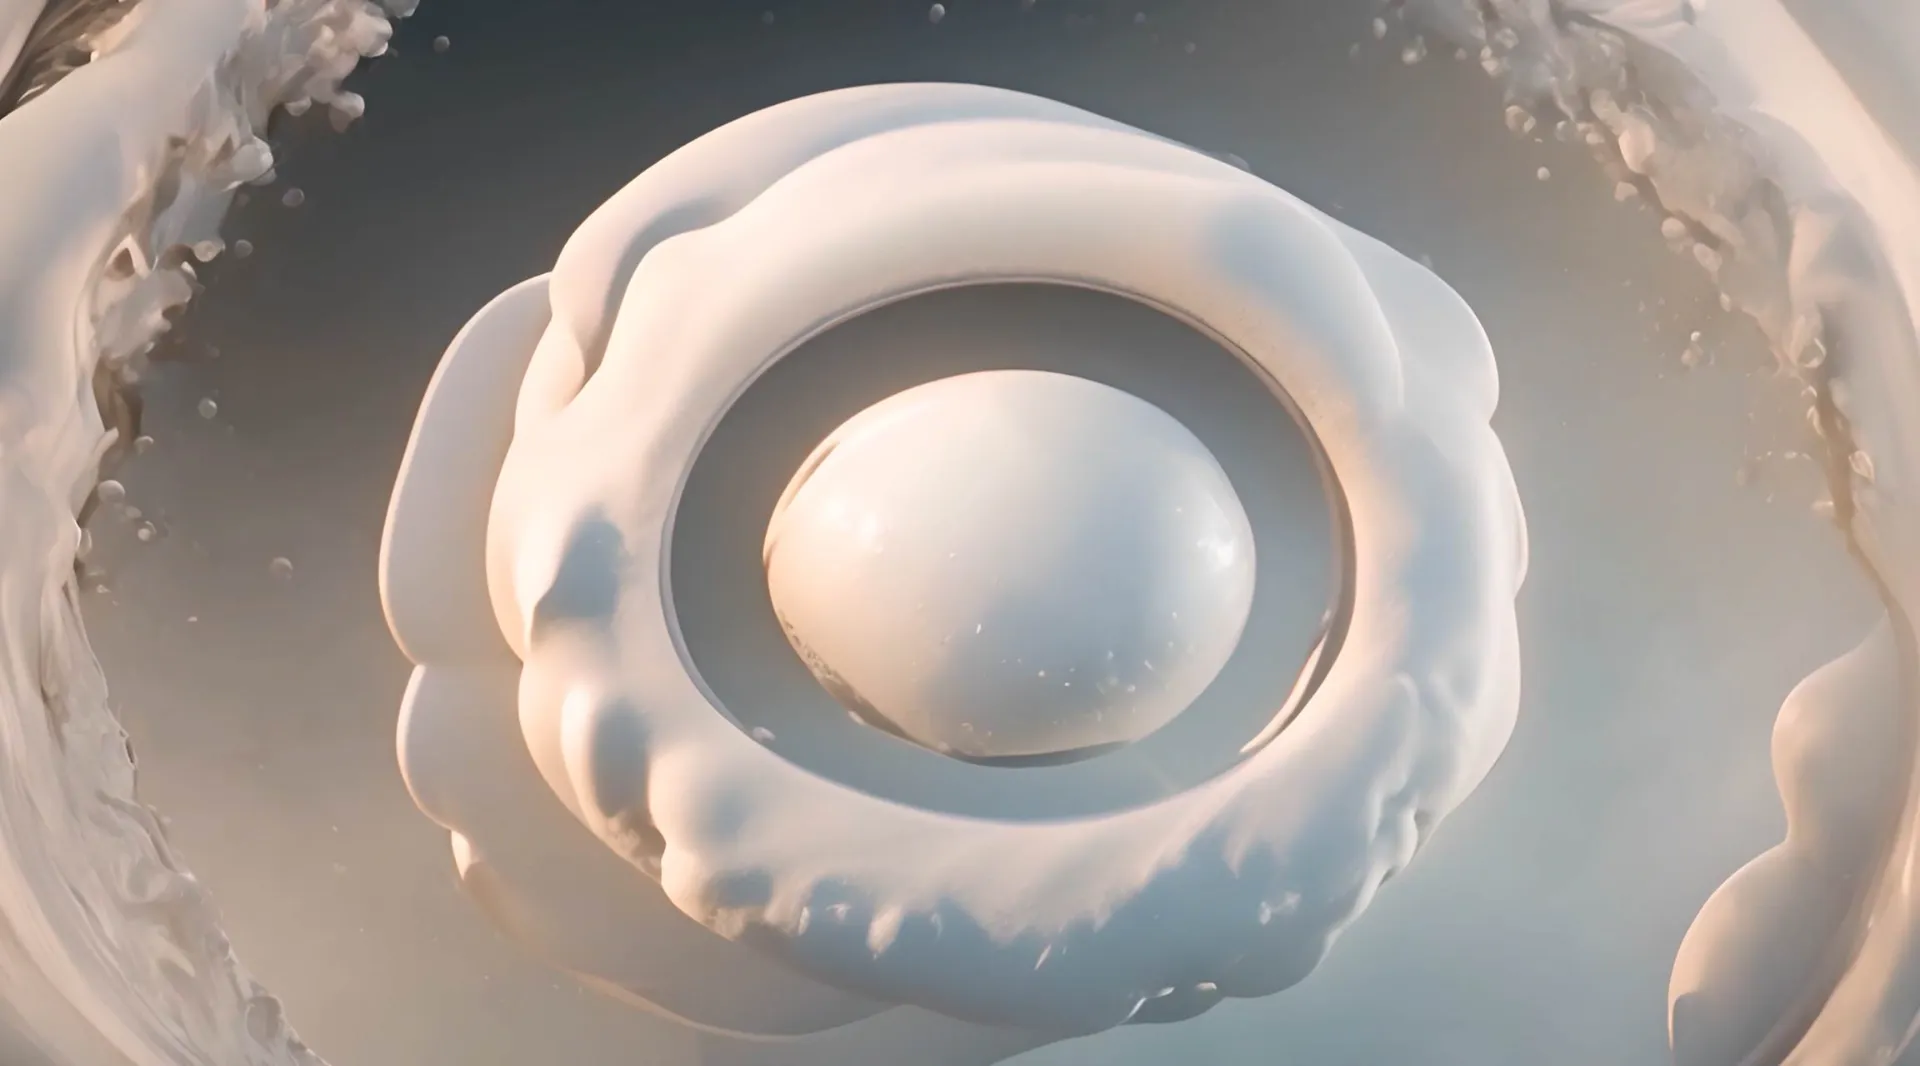 Surreal Milk Whirlpool Abstract Video Backdrop